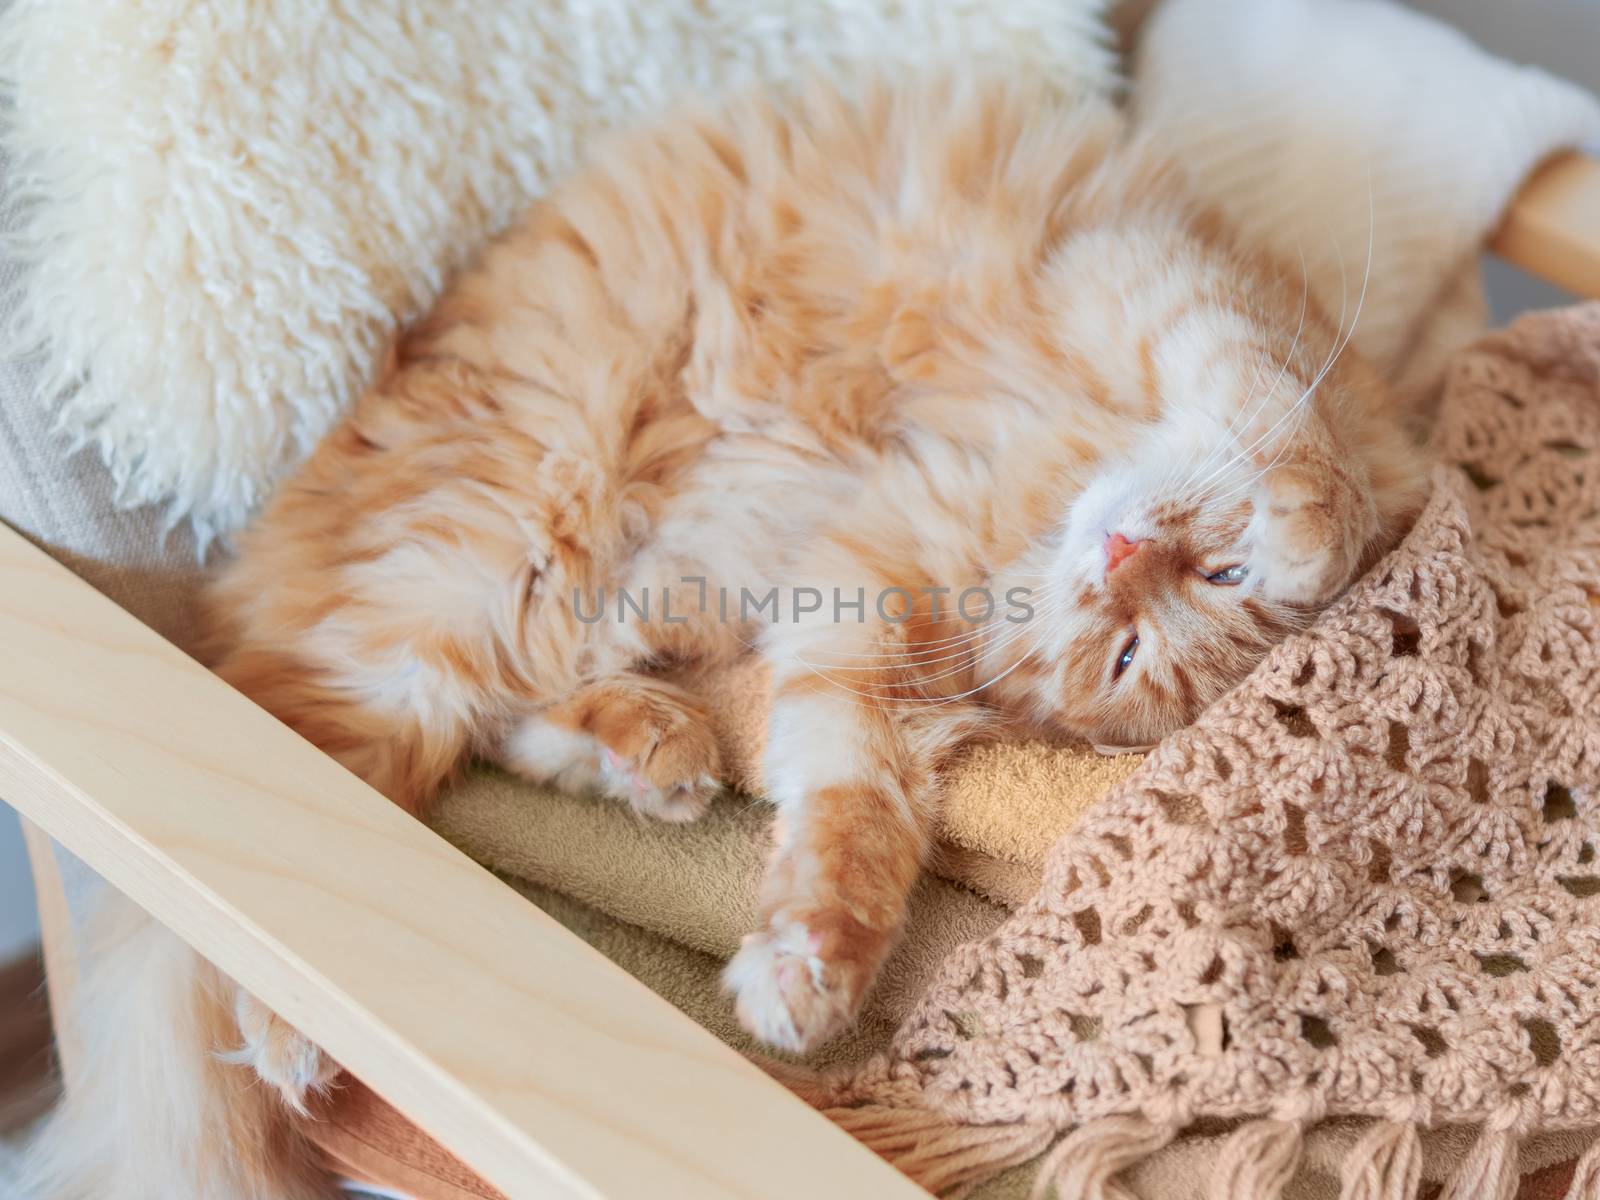 Cute ginger cat sleeping on pile of clothes. Fluffy pet mimics the color of textile.